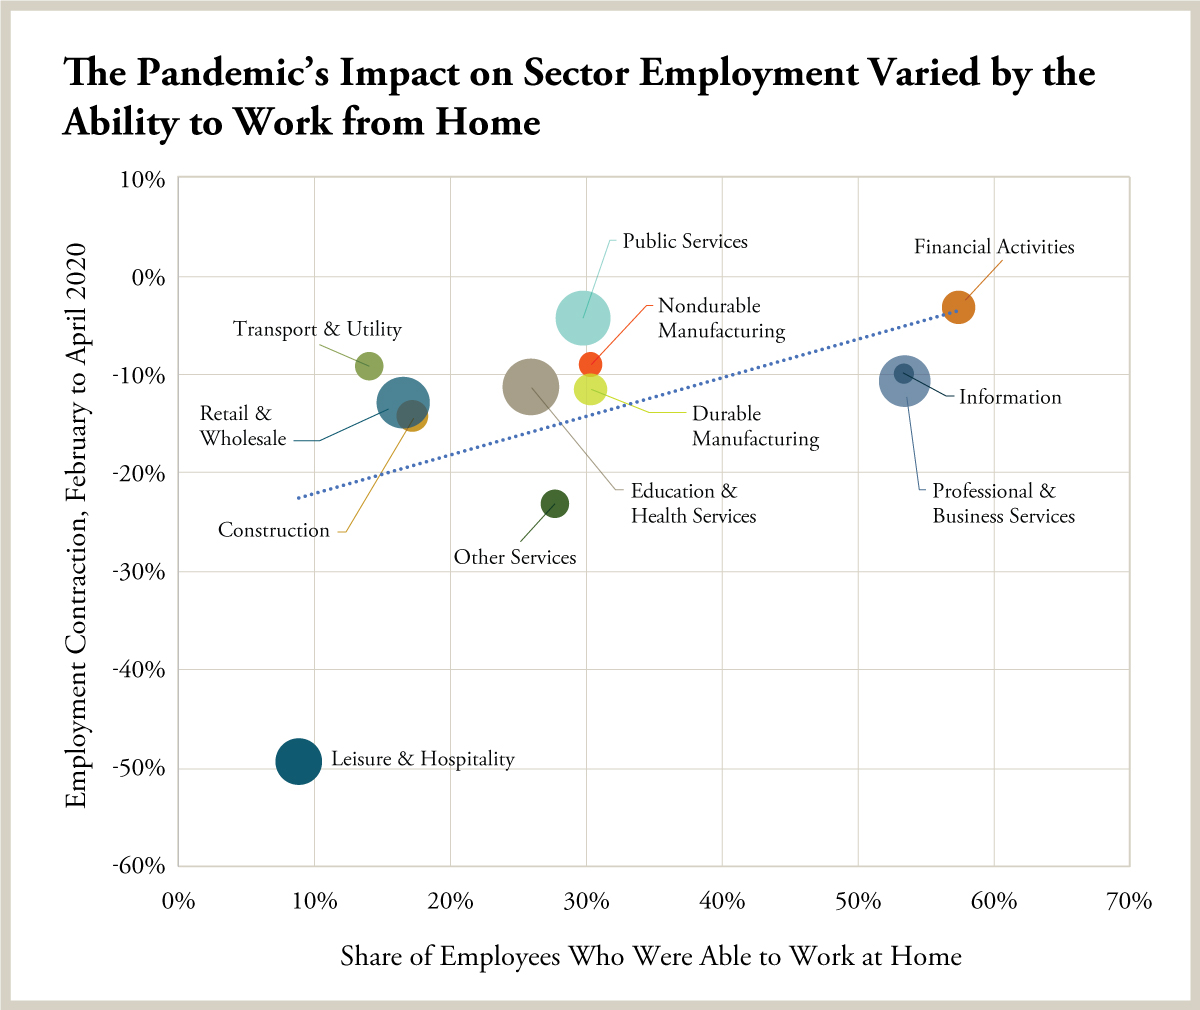 The Pandemic’s Impact on Sector Employment Varied by the Ability to Work from Home